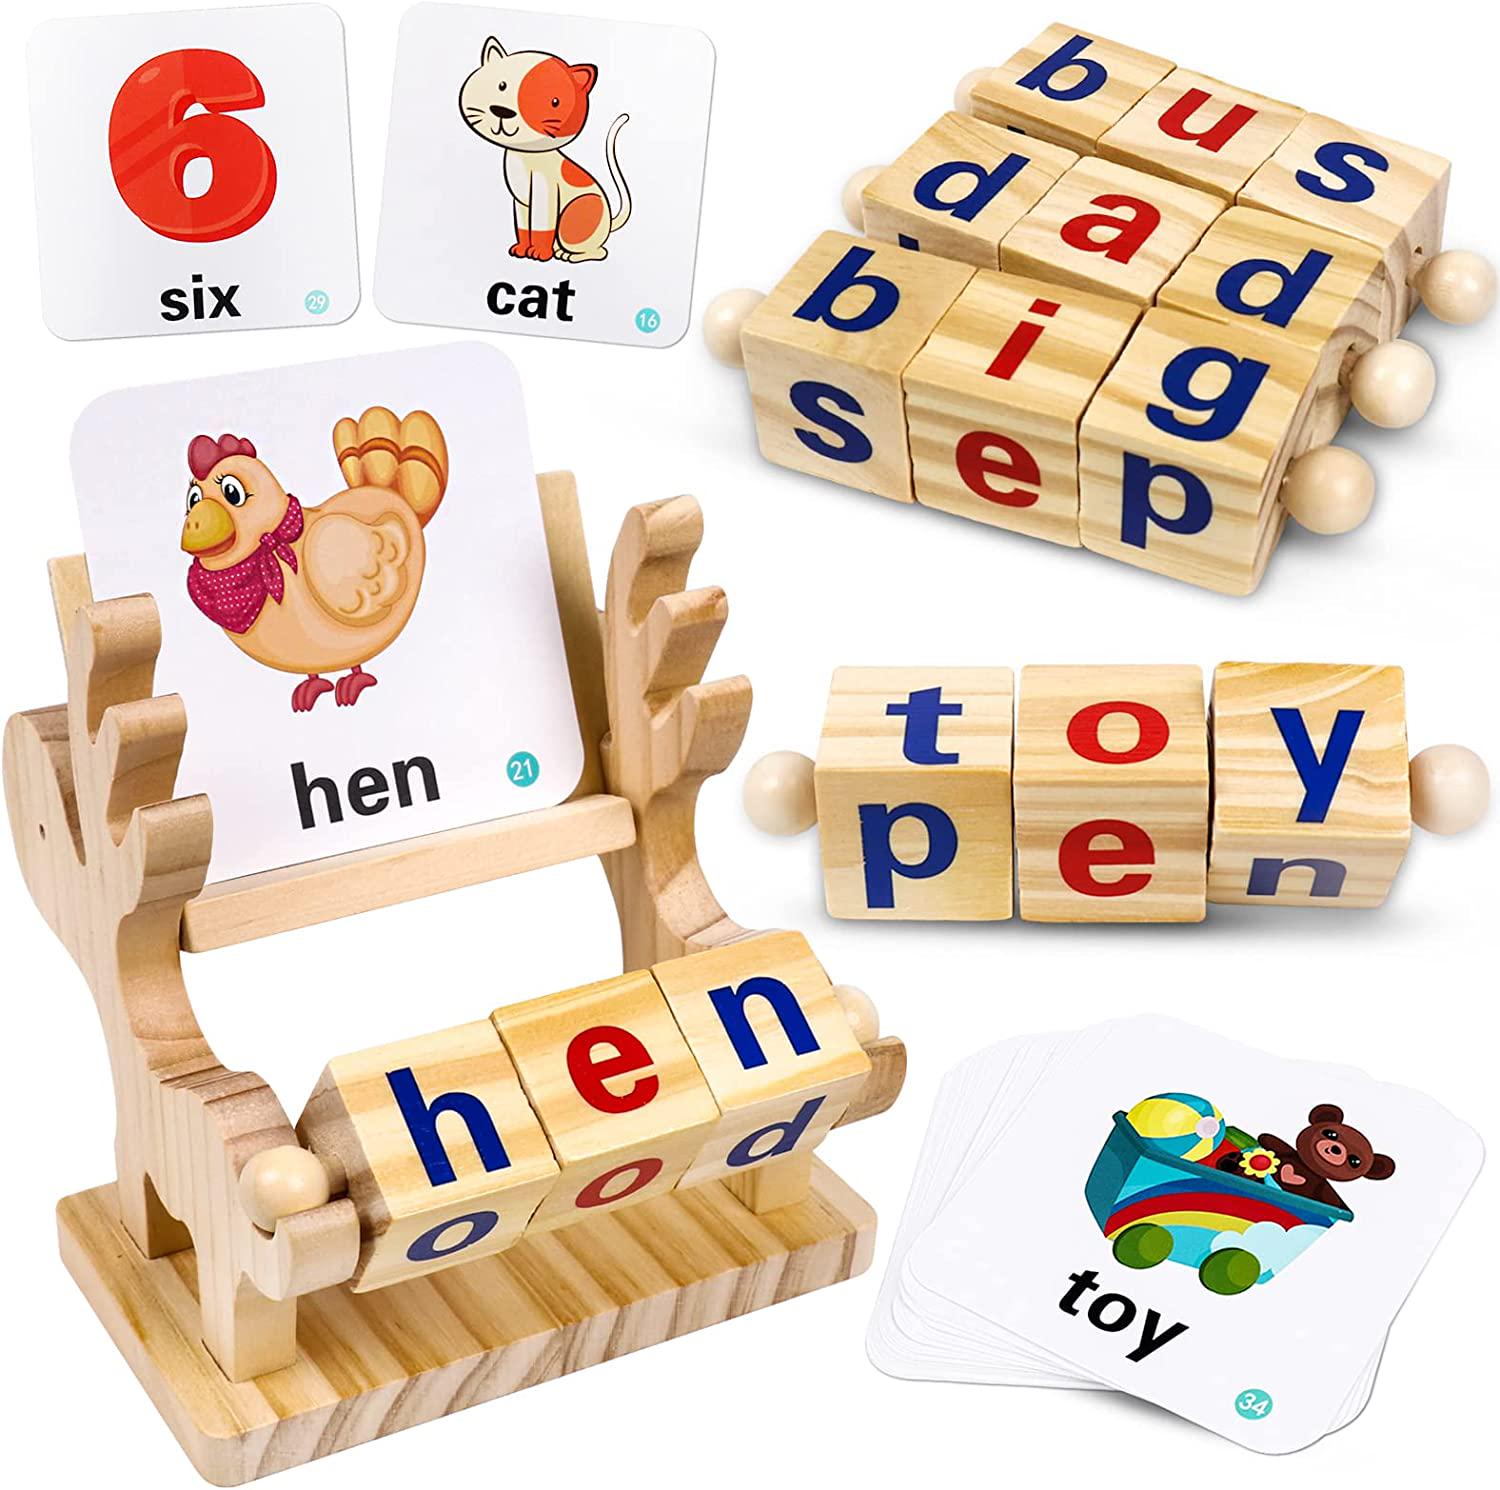 kizh, kizh Numbers and Alphabets Flash Cards Set,Wooden Letters and Numbers Animal Card Board Matching Puzzle Game Montessori Educational Toys Gift for 1 2 3 Years Old Toddlers Boys Grils